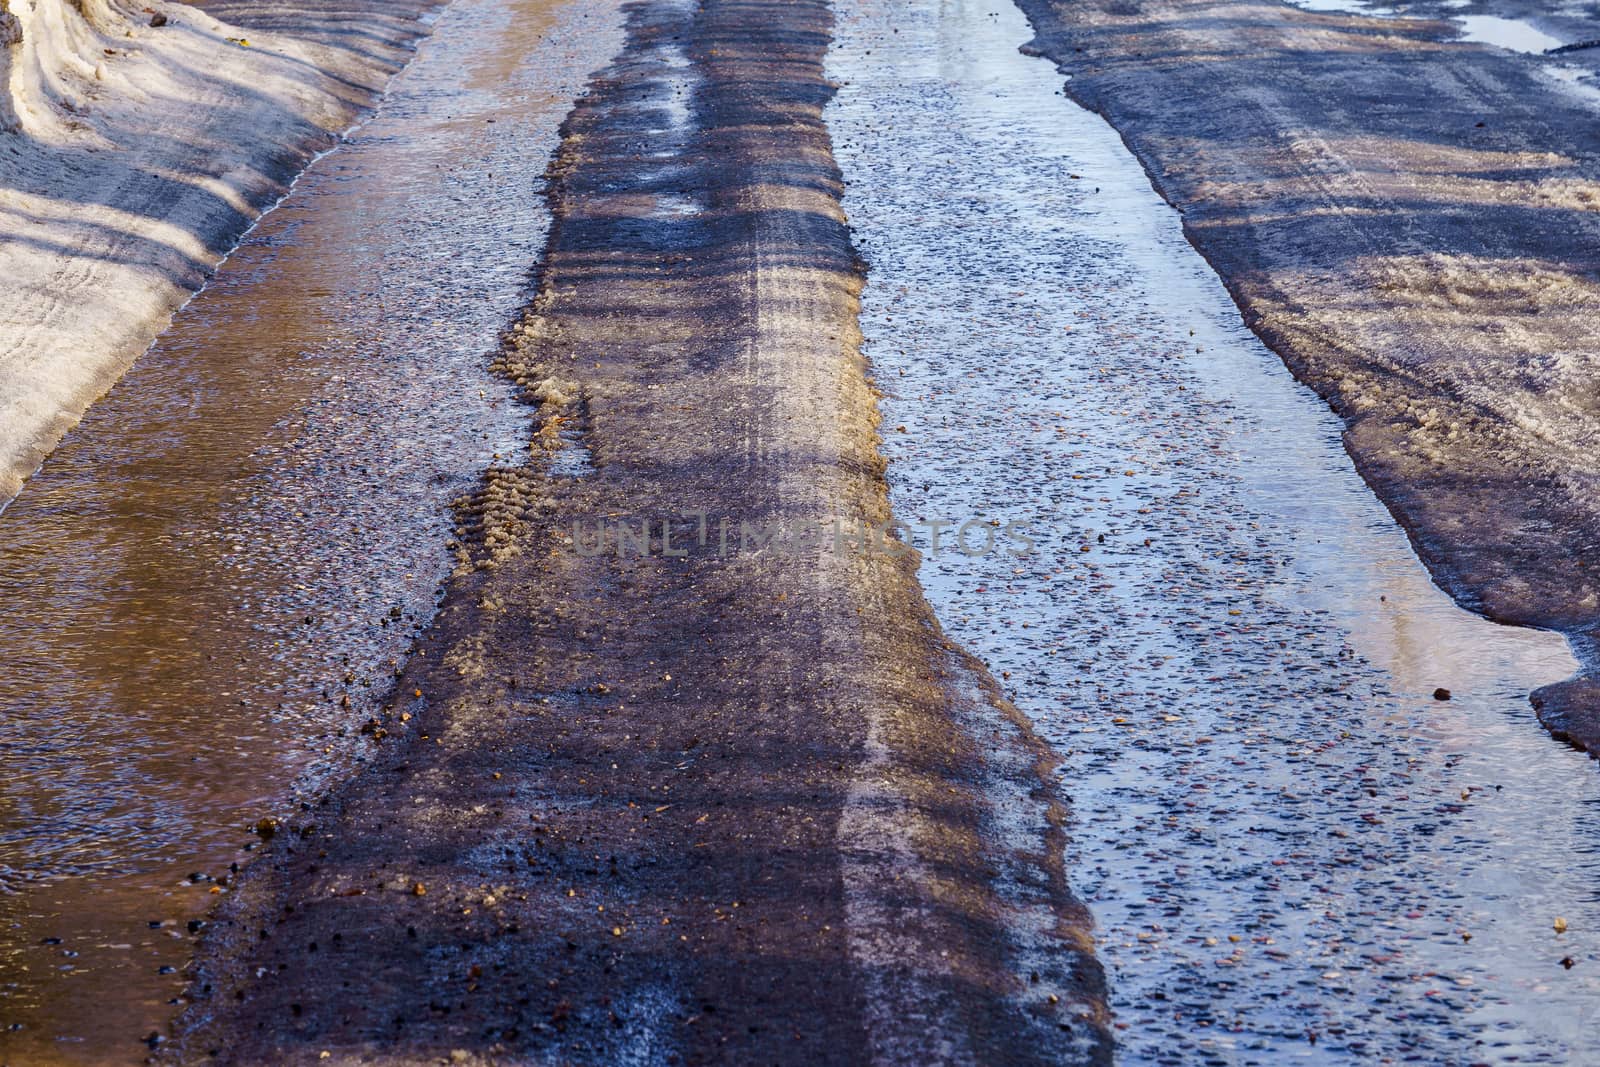 winter road covered with snow and ice with puddles and ruts, sunny day